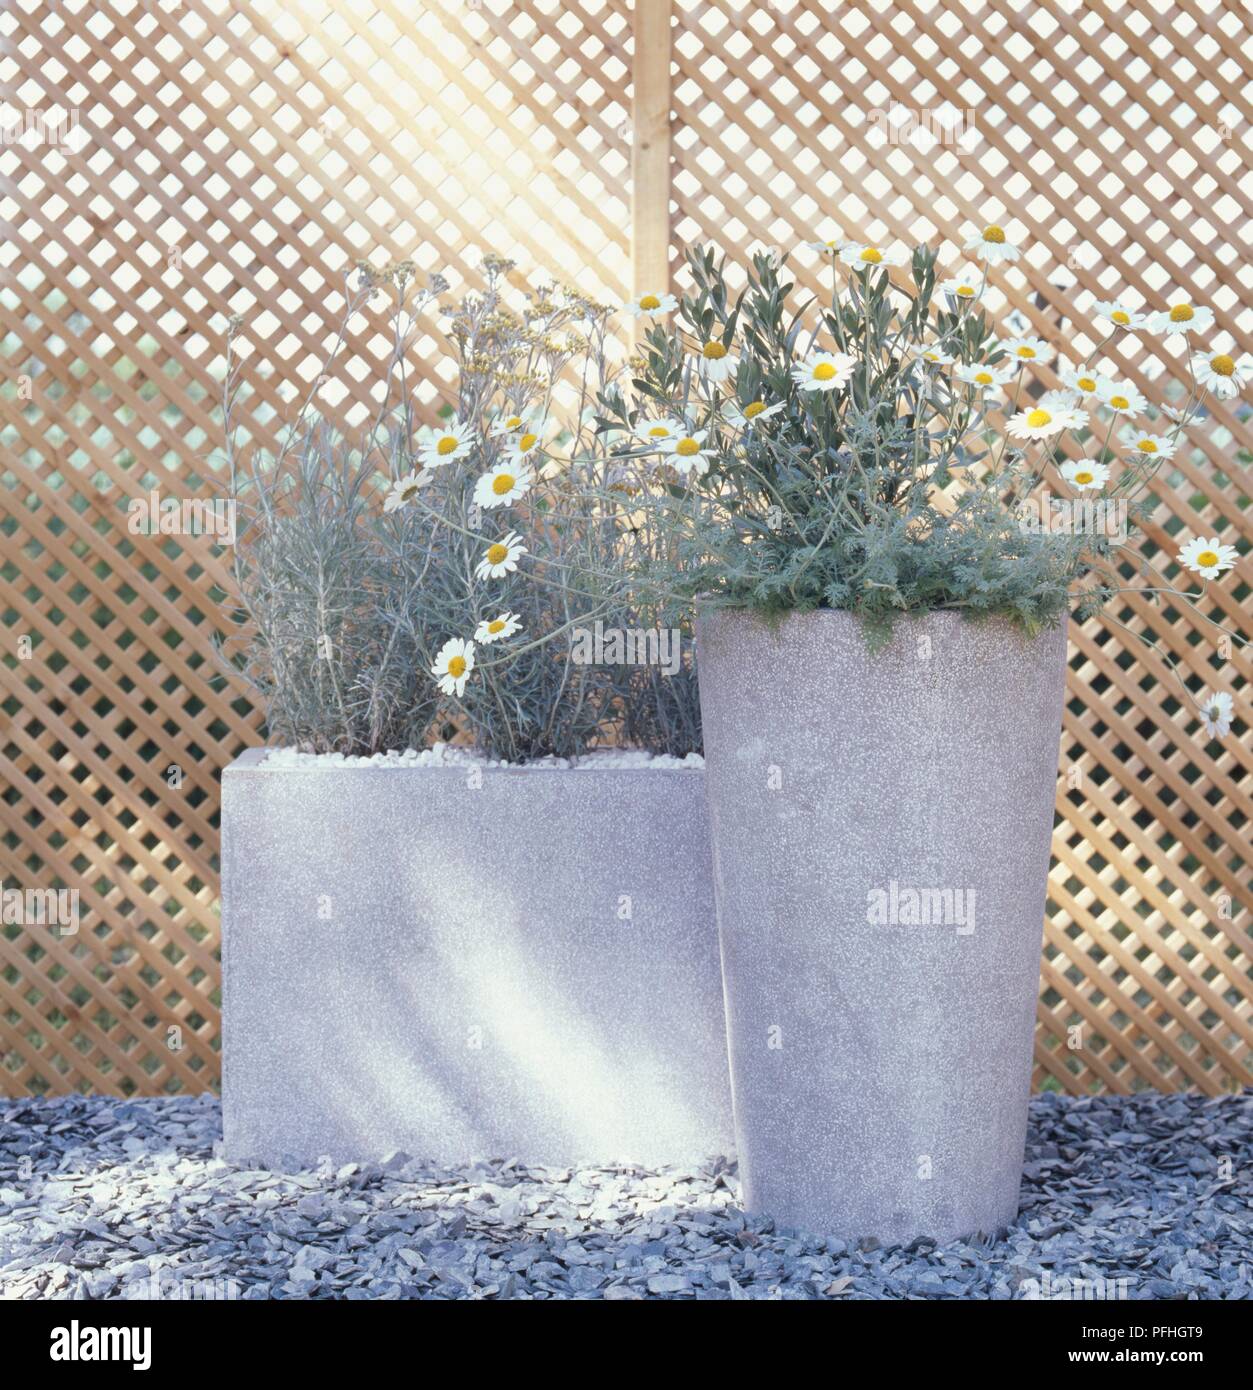 Helichrysum italicum, Anthemis punctata ssp cupaniana (Chamomile plant), Convolvulus cneorum (Silverbush) in concrete containers, ground covered with slate chippings Stock Photo